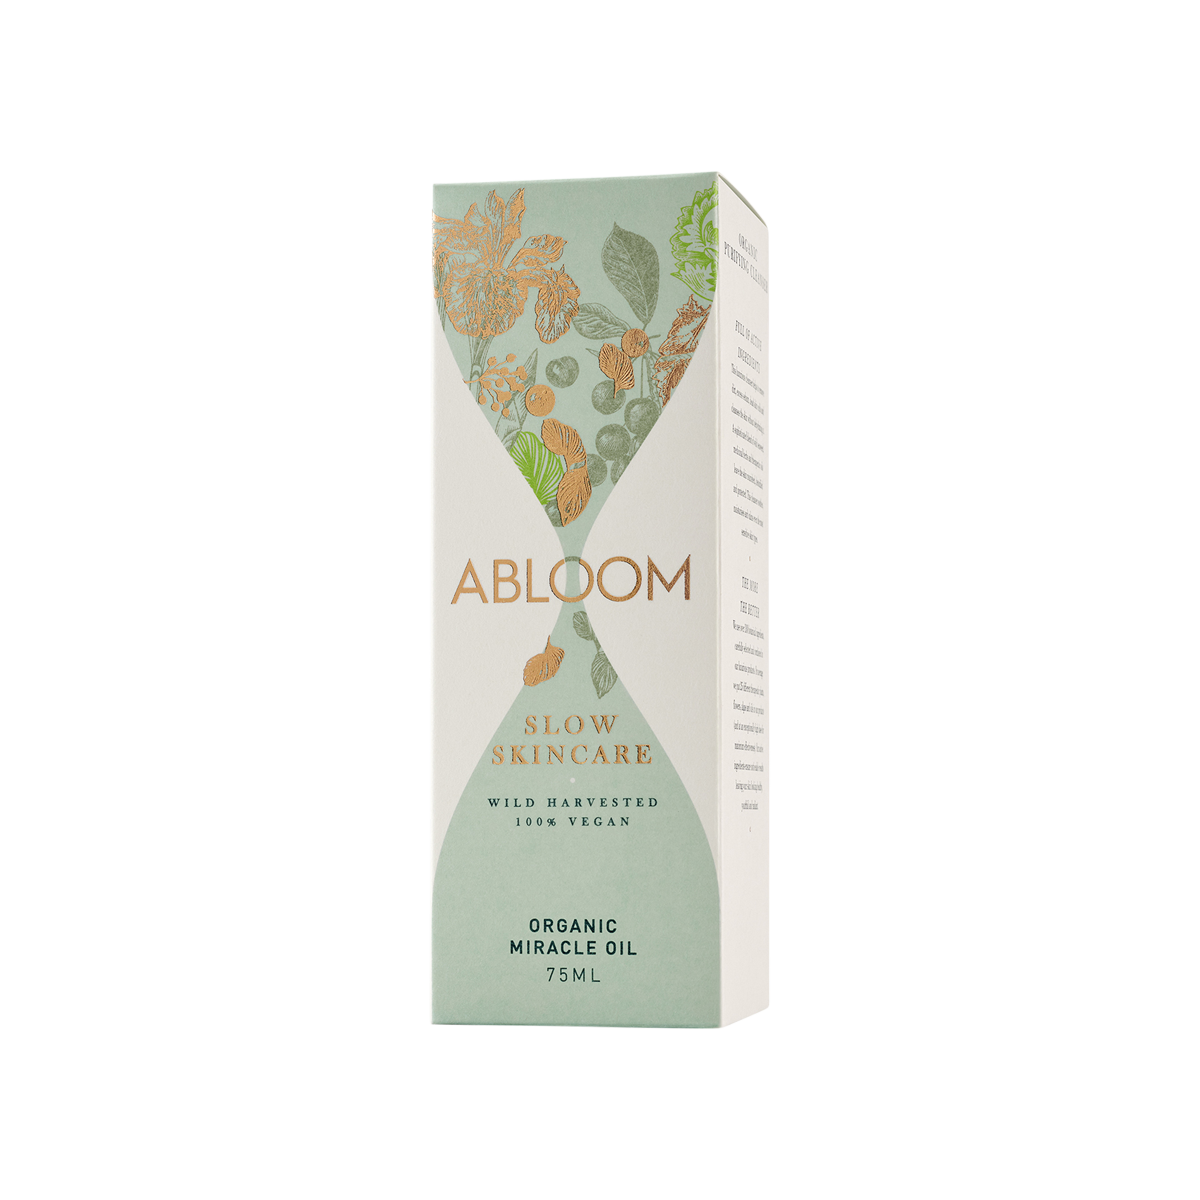 ABLOOM - Organic Miracle Oil